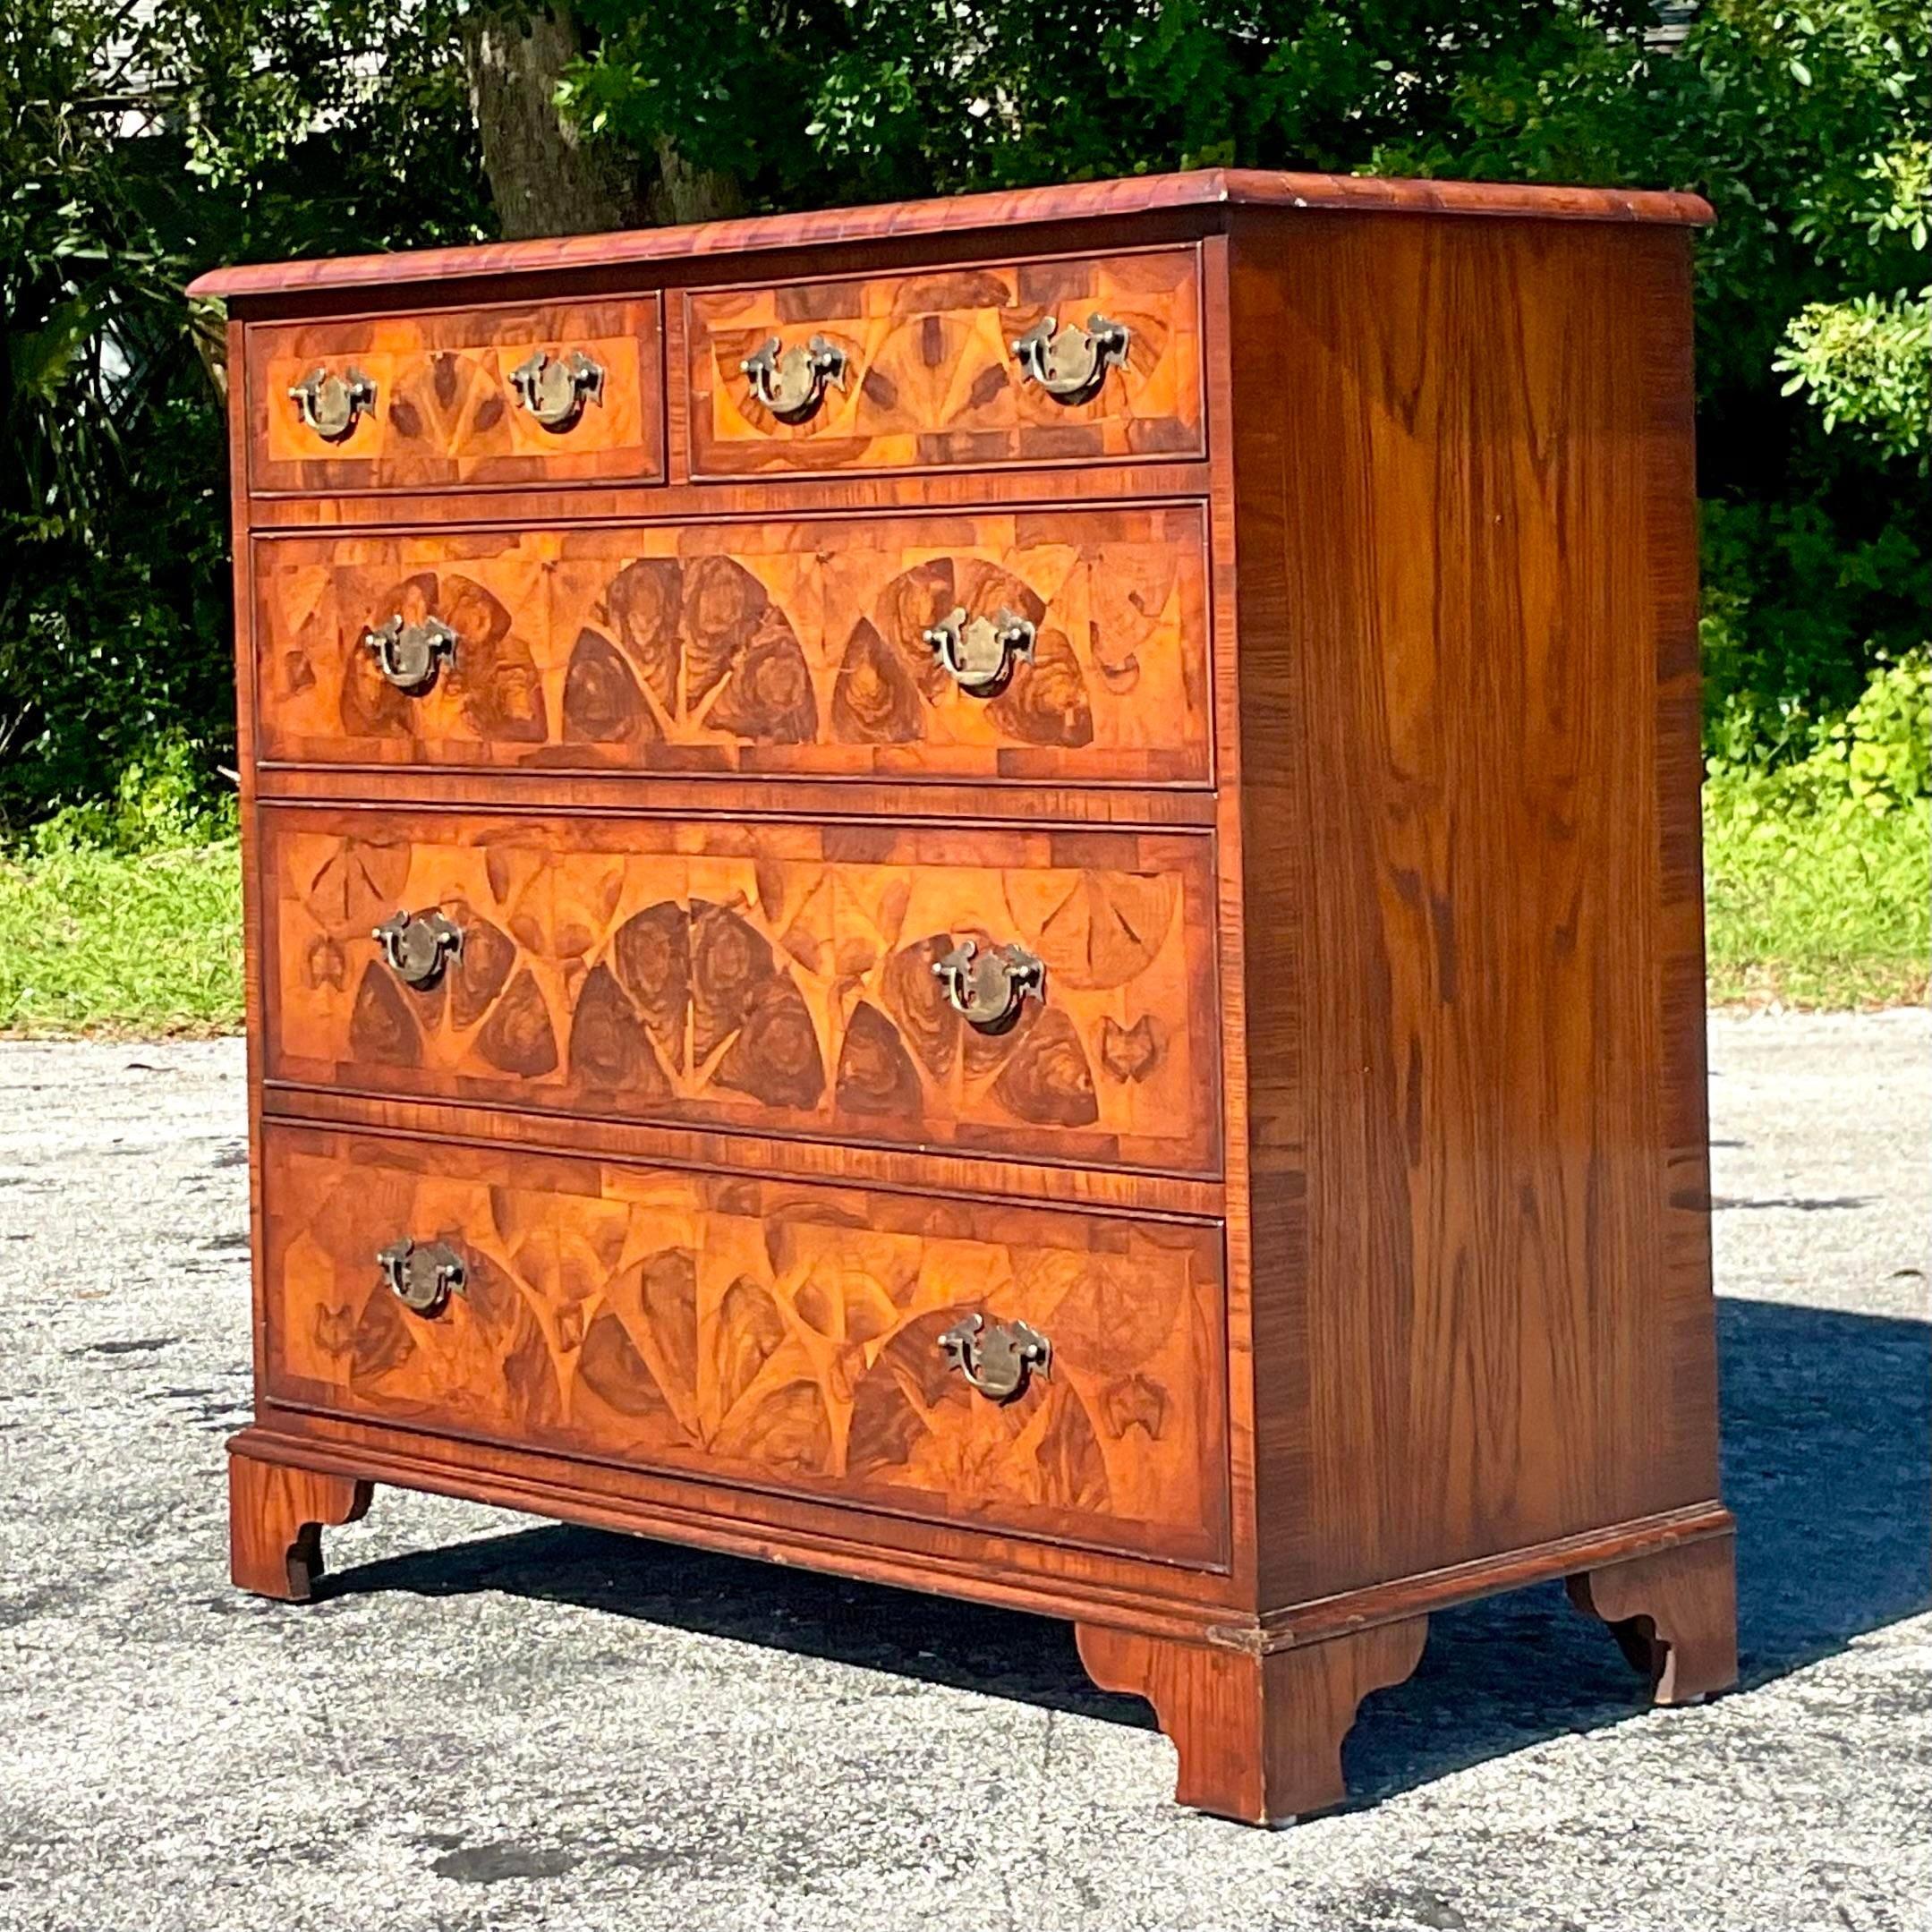 A superb vintage Regency chest of drawers. A gorgeous combination of marquetry and inlay details. Stunning oyster Burl wood detail with brass hardware. Acquired from a Palm Beach estate.